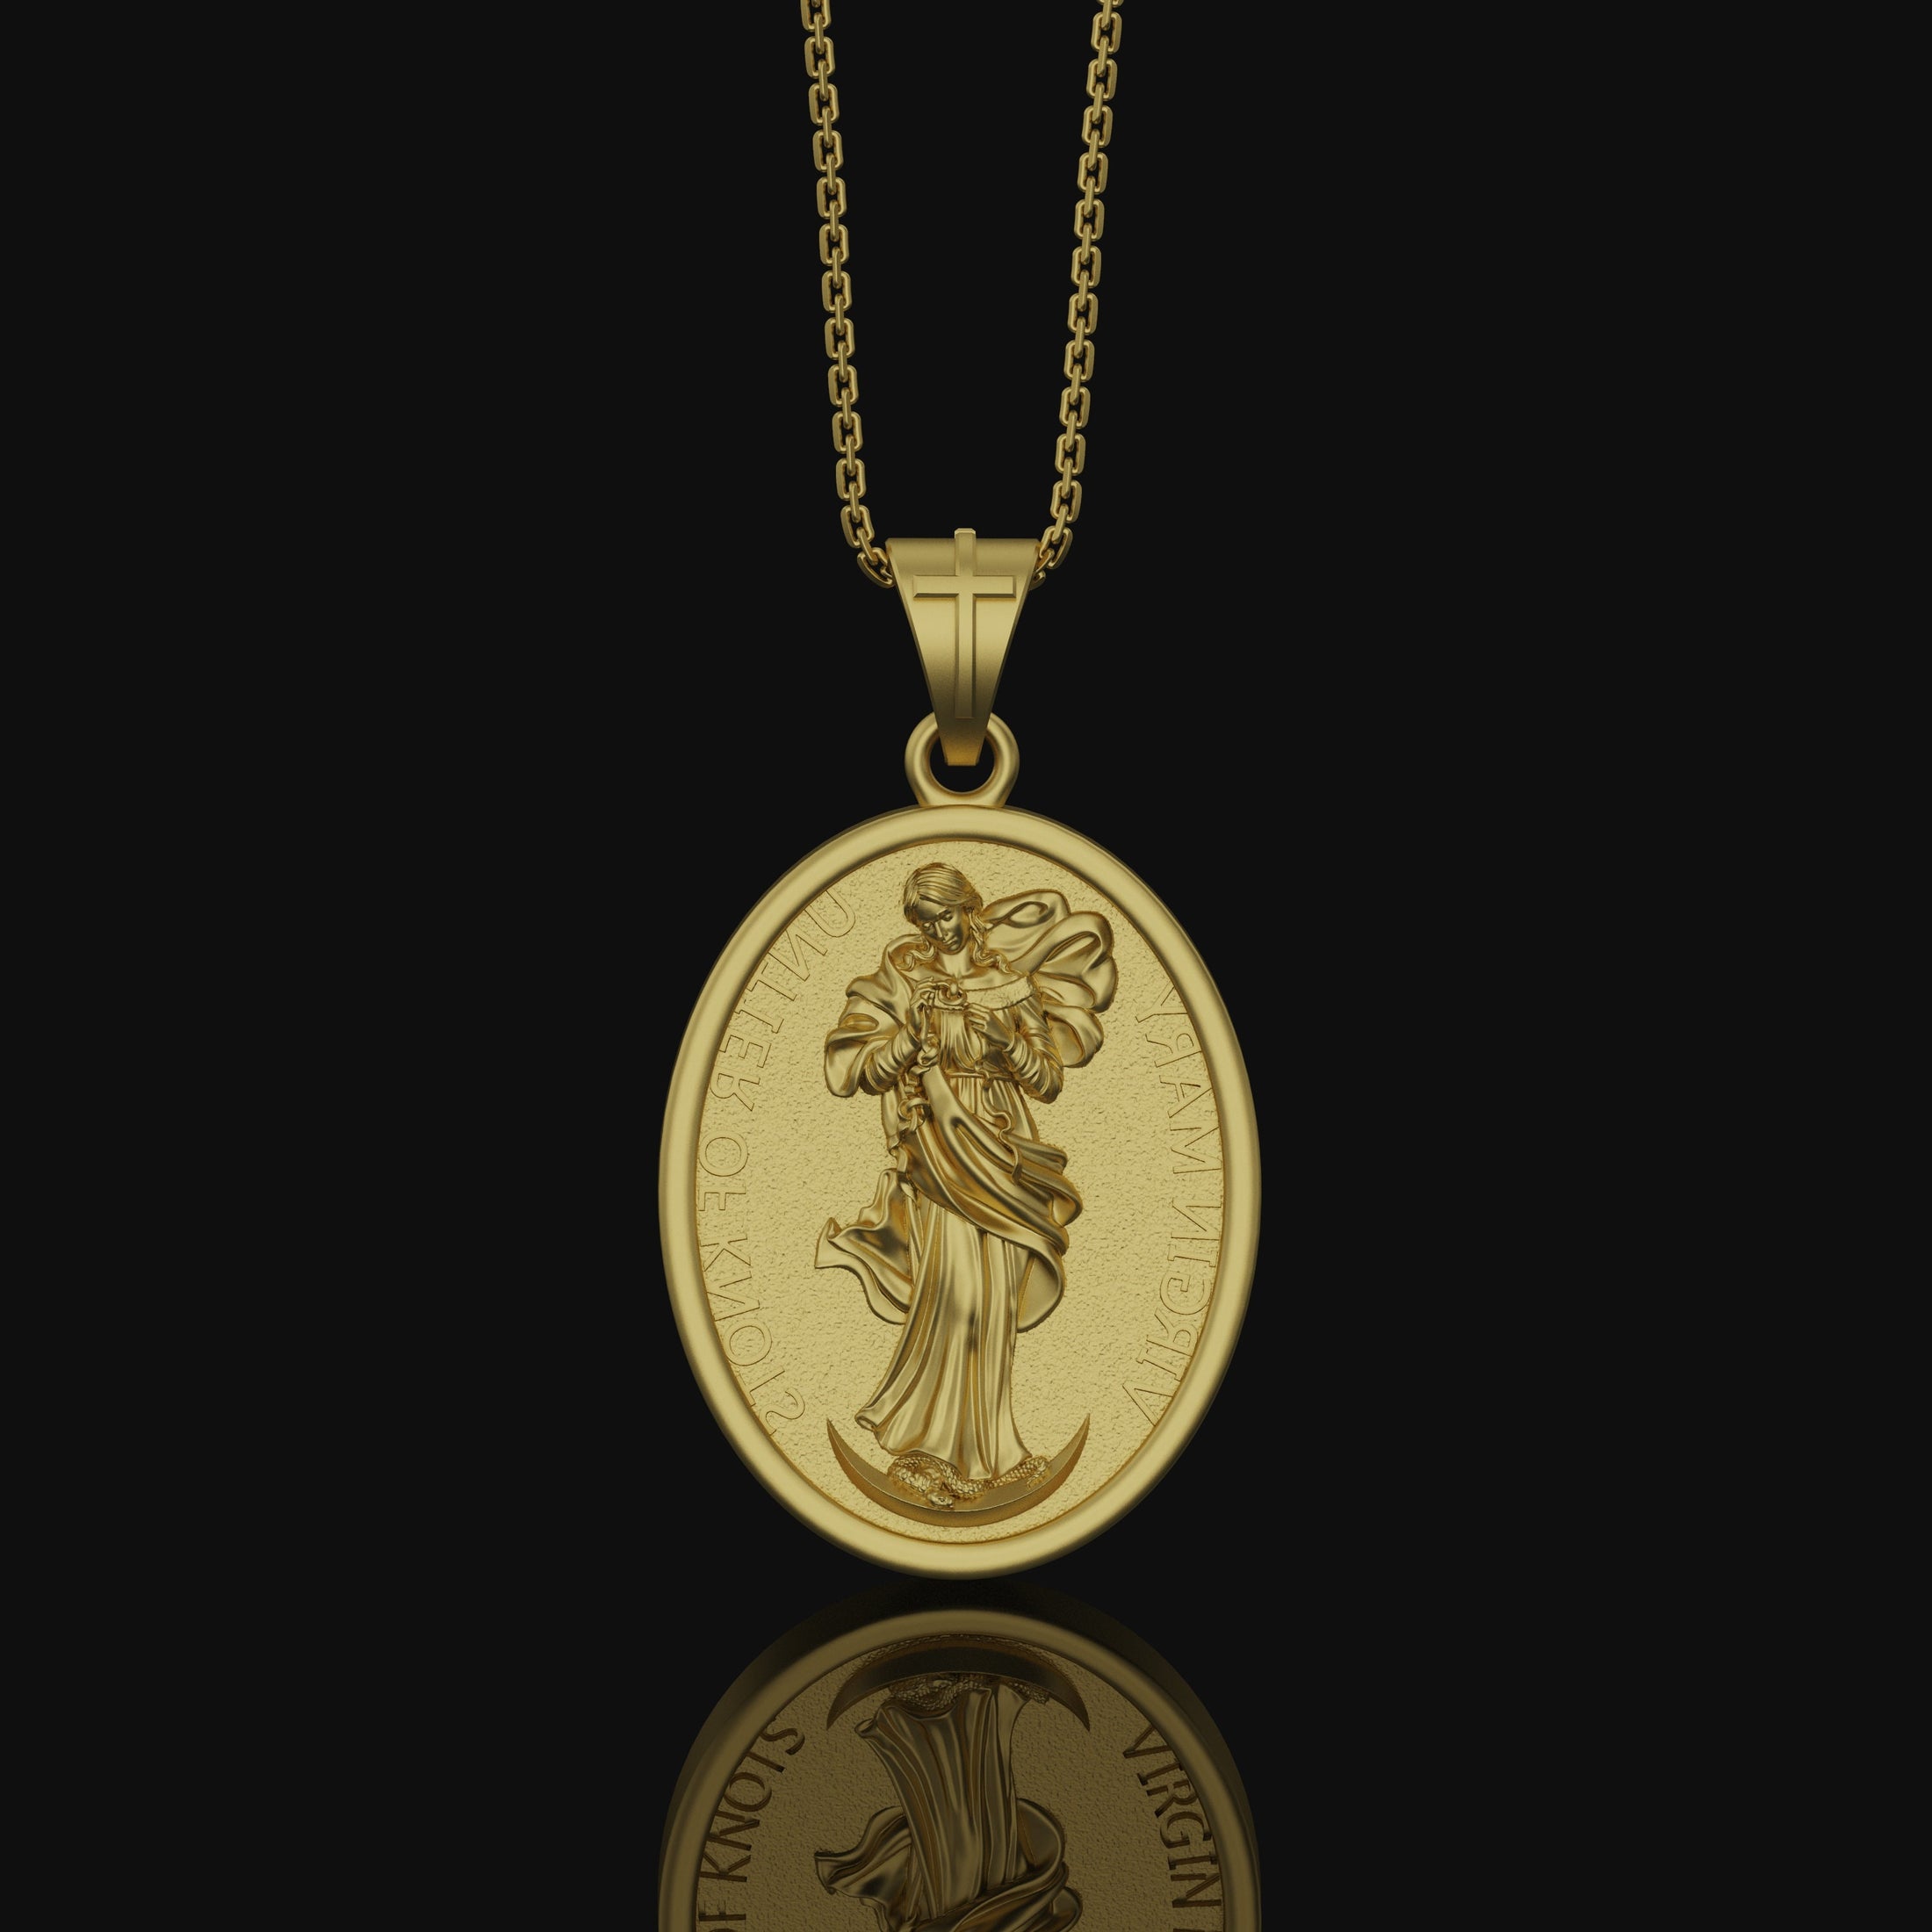 Mary Untier of Knots, Our Lady, Virgin Mary Medal, Virgin Mary, Catholic Gift, Catholic Medals, Confirmation Gift, Christian Jewelry Gold Finish